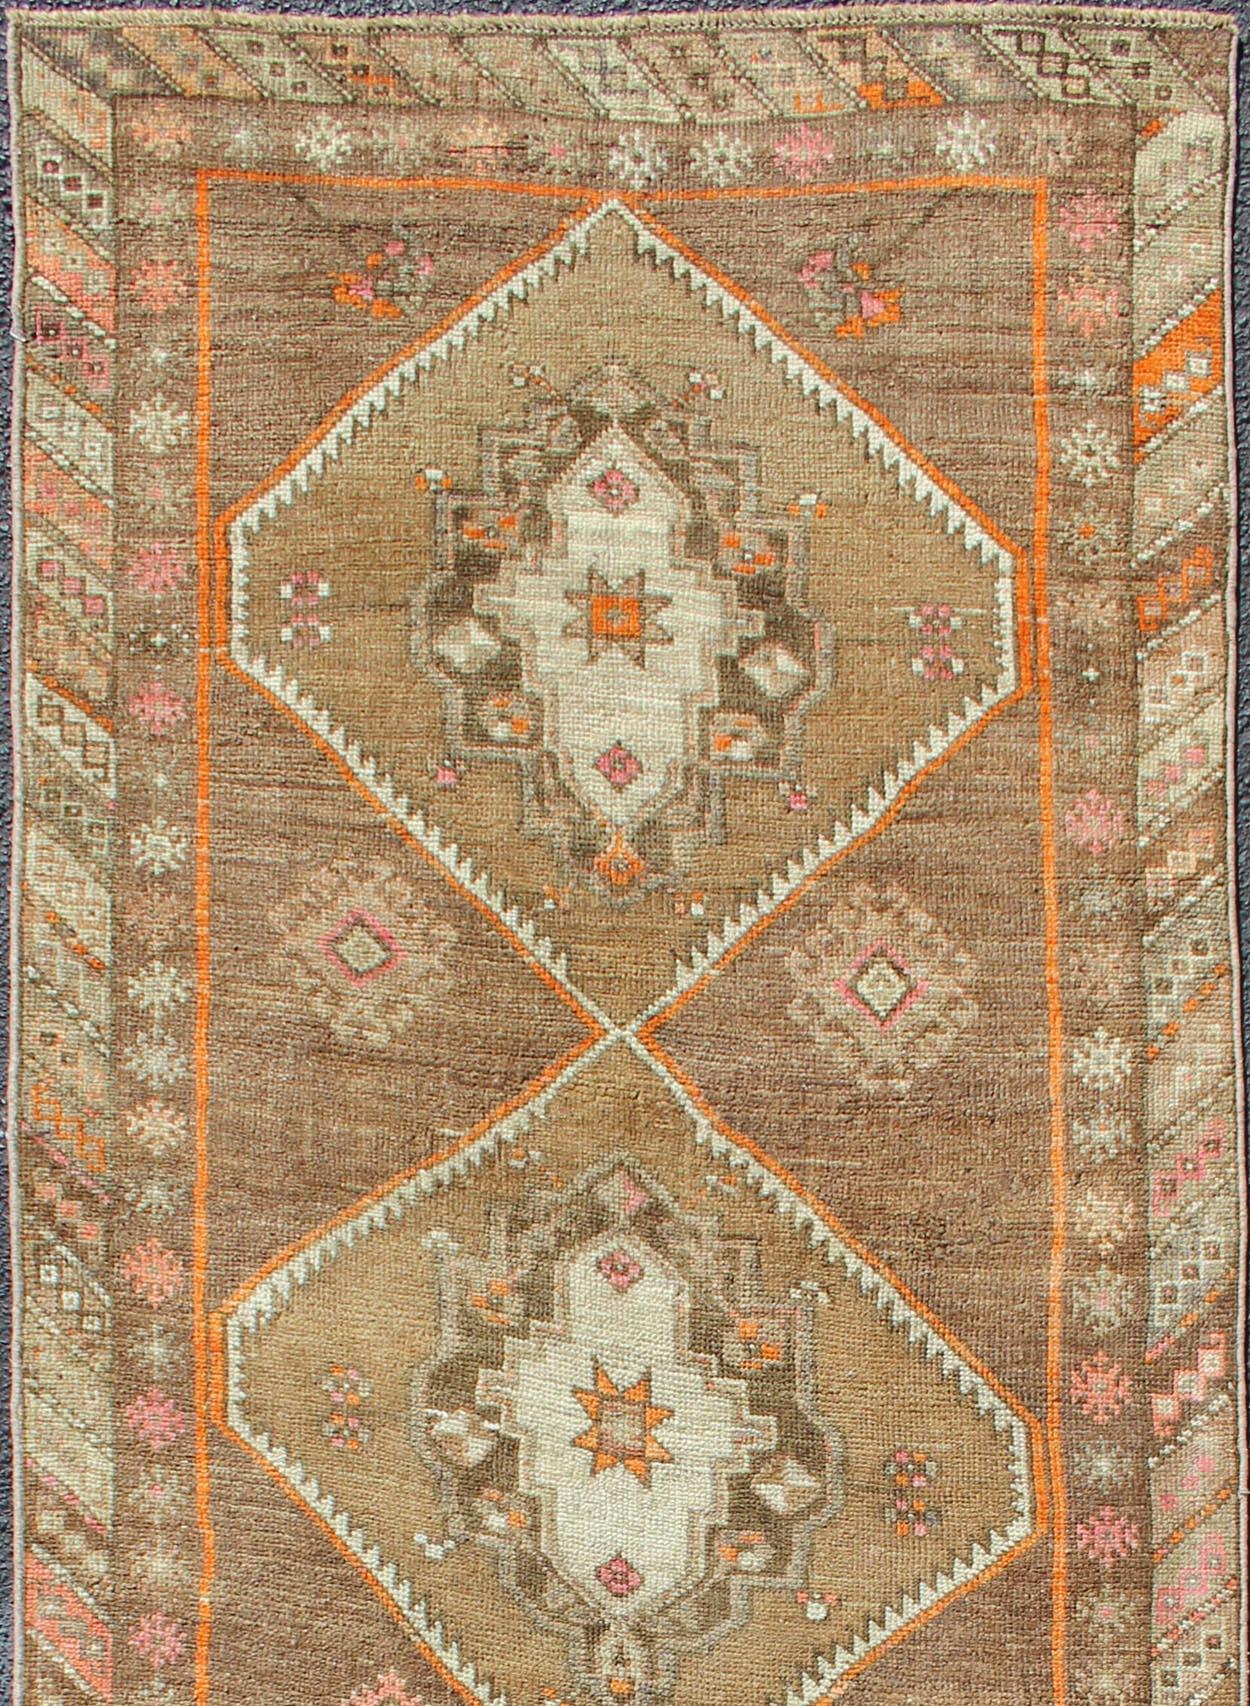 Vintage Turkish Oushak runner with floral medallions, Keivan Woven Arts / rug en-140350, country of origin / type: Turkey / Oushak, circa 1940.

This vintage Oushak runner features a unique blend of cheerful colors and an intricately beautiful